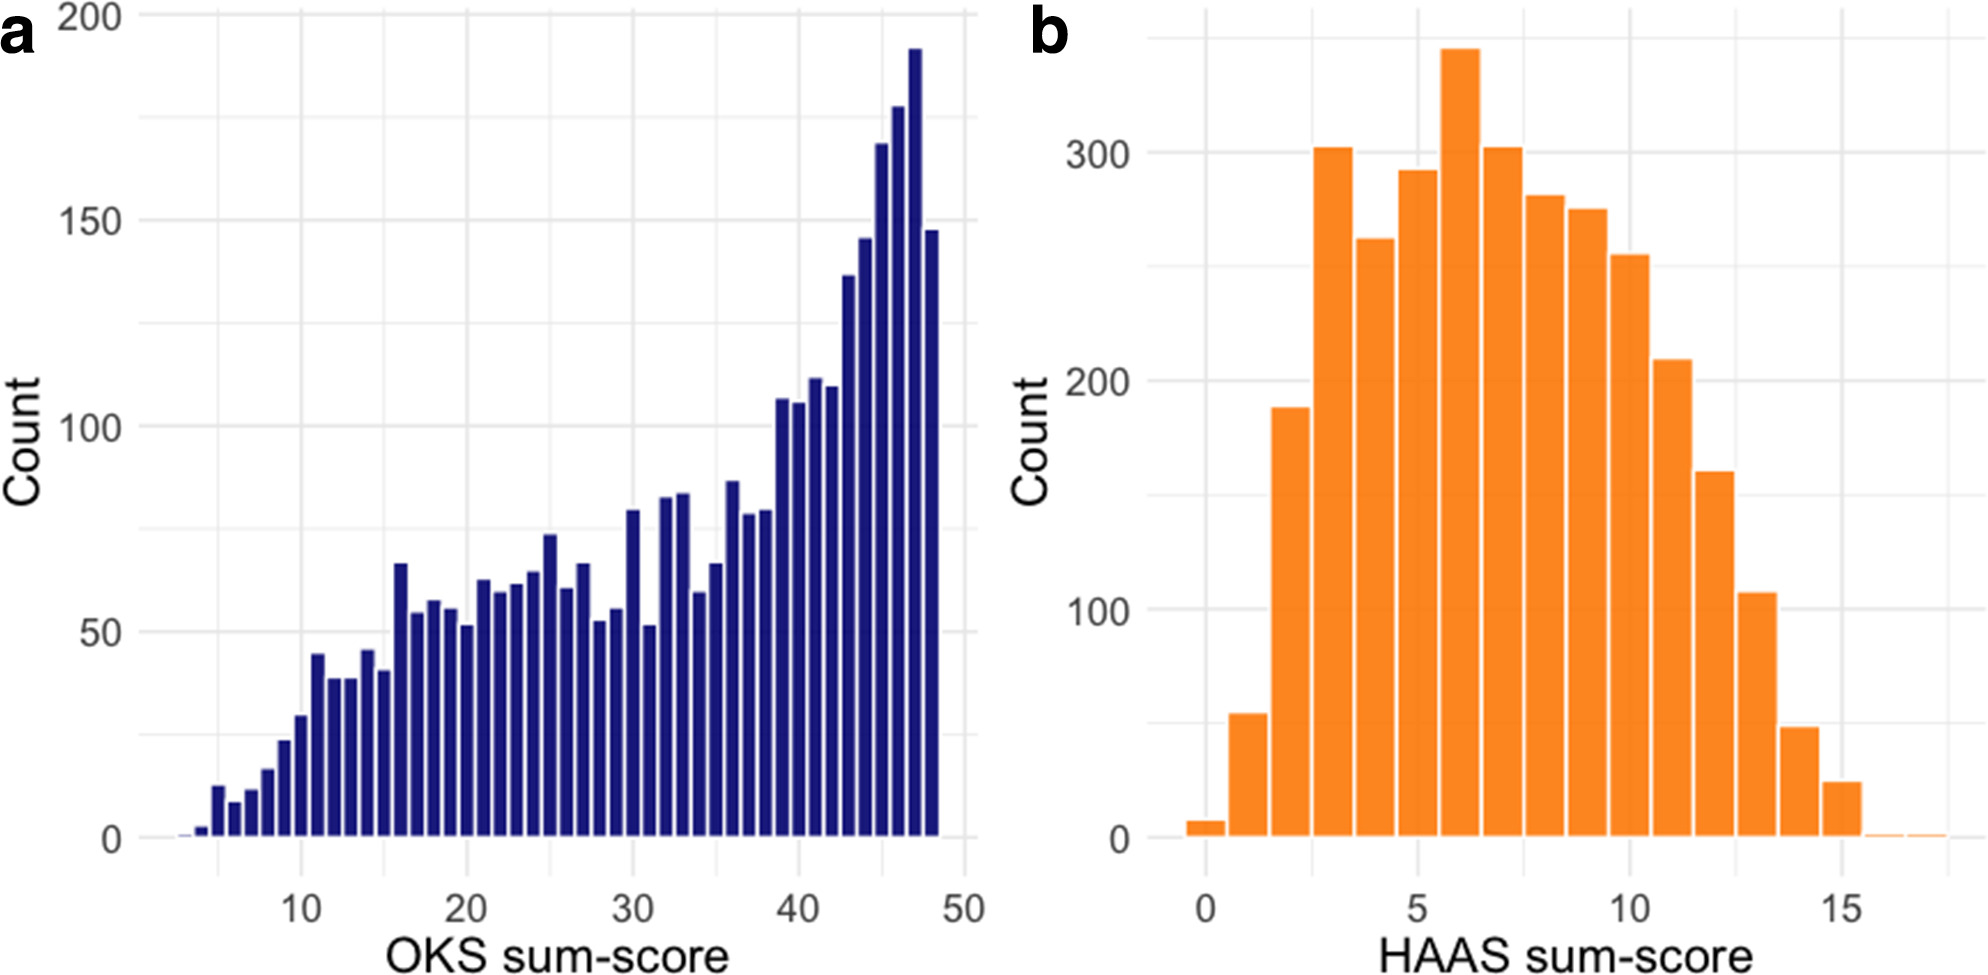 Fig. 2 
            Histograms demonstrating the sum-score distribution of a) the Oxford Knee Score (OKS) and b) High Activity Arthroplasty Score (HAAS). The distribution of OKS sum-scores is positively skewed, while the distribution of HAAS has a slight negative skew.
          